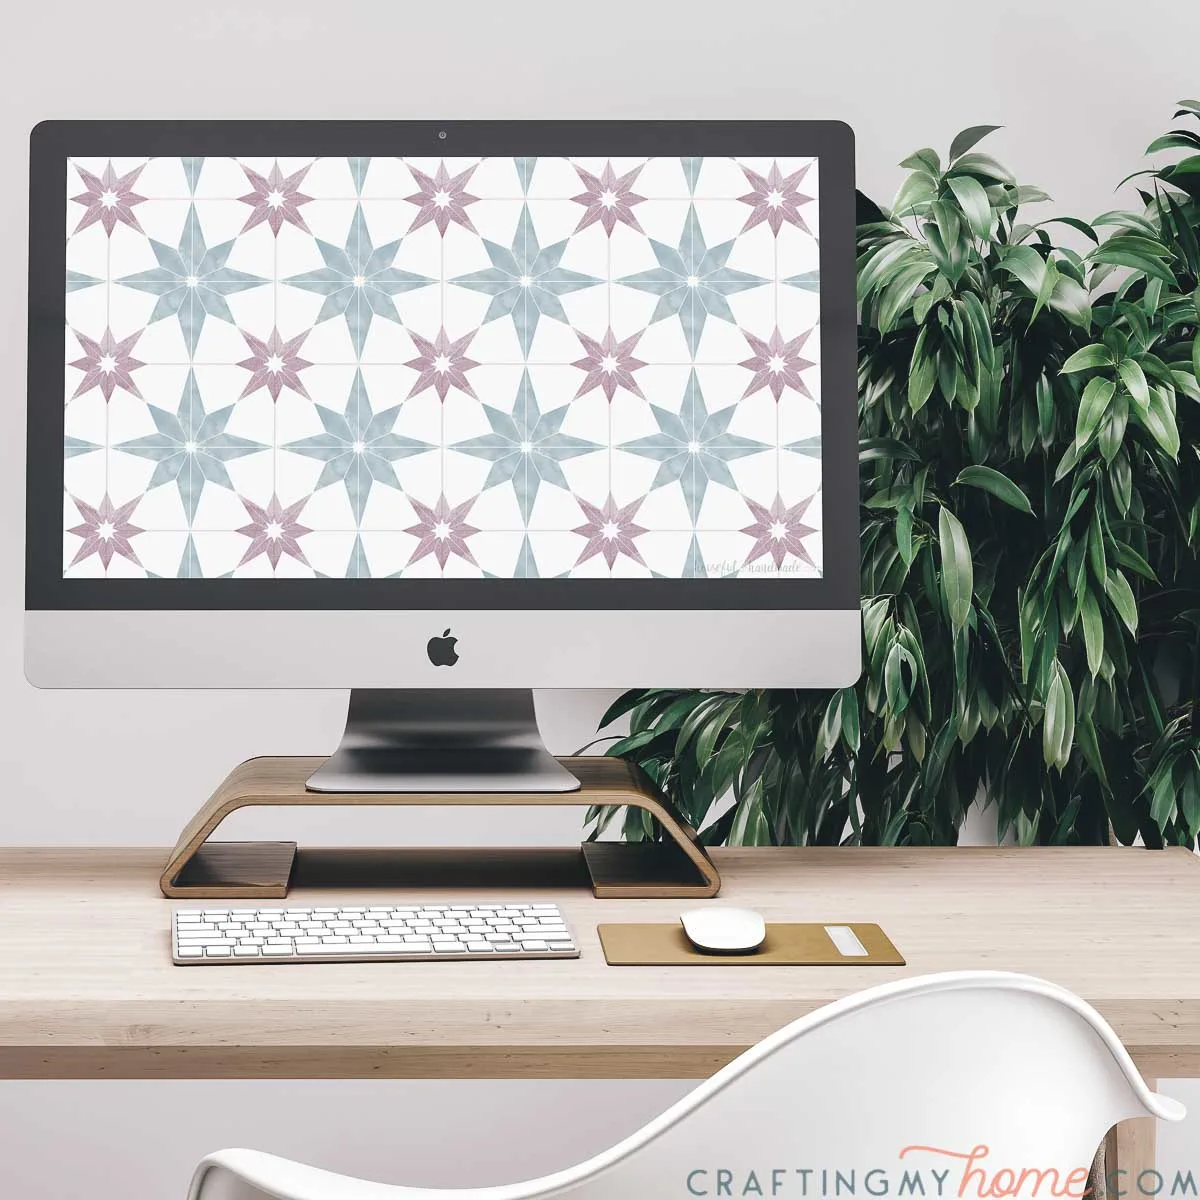 The free digital background for March on the screen of an iMac computer sitting on a desk with a plant behind it. 